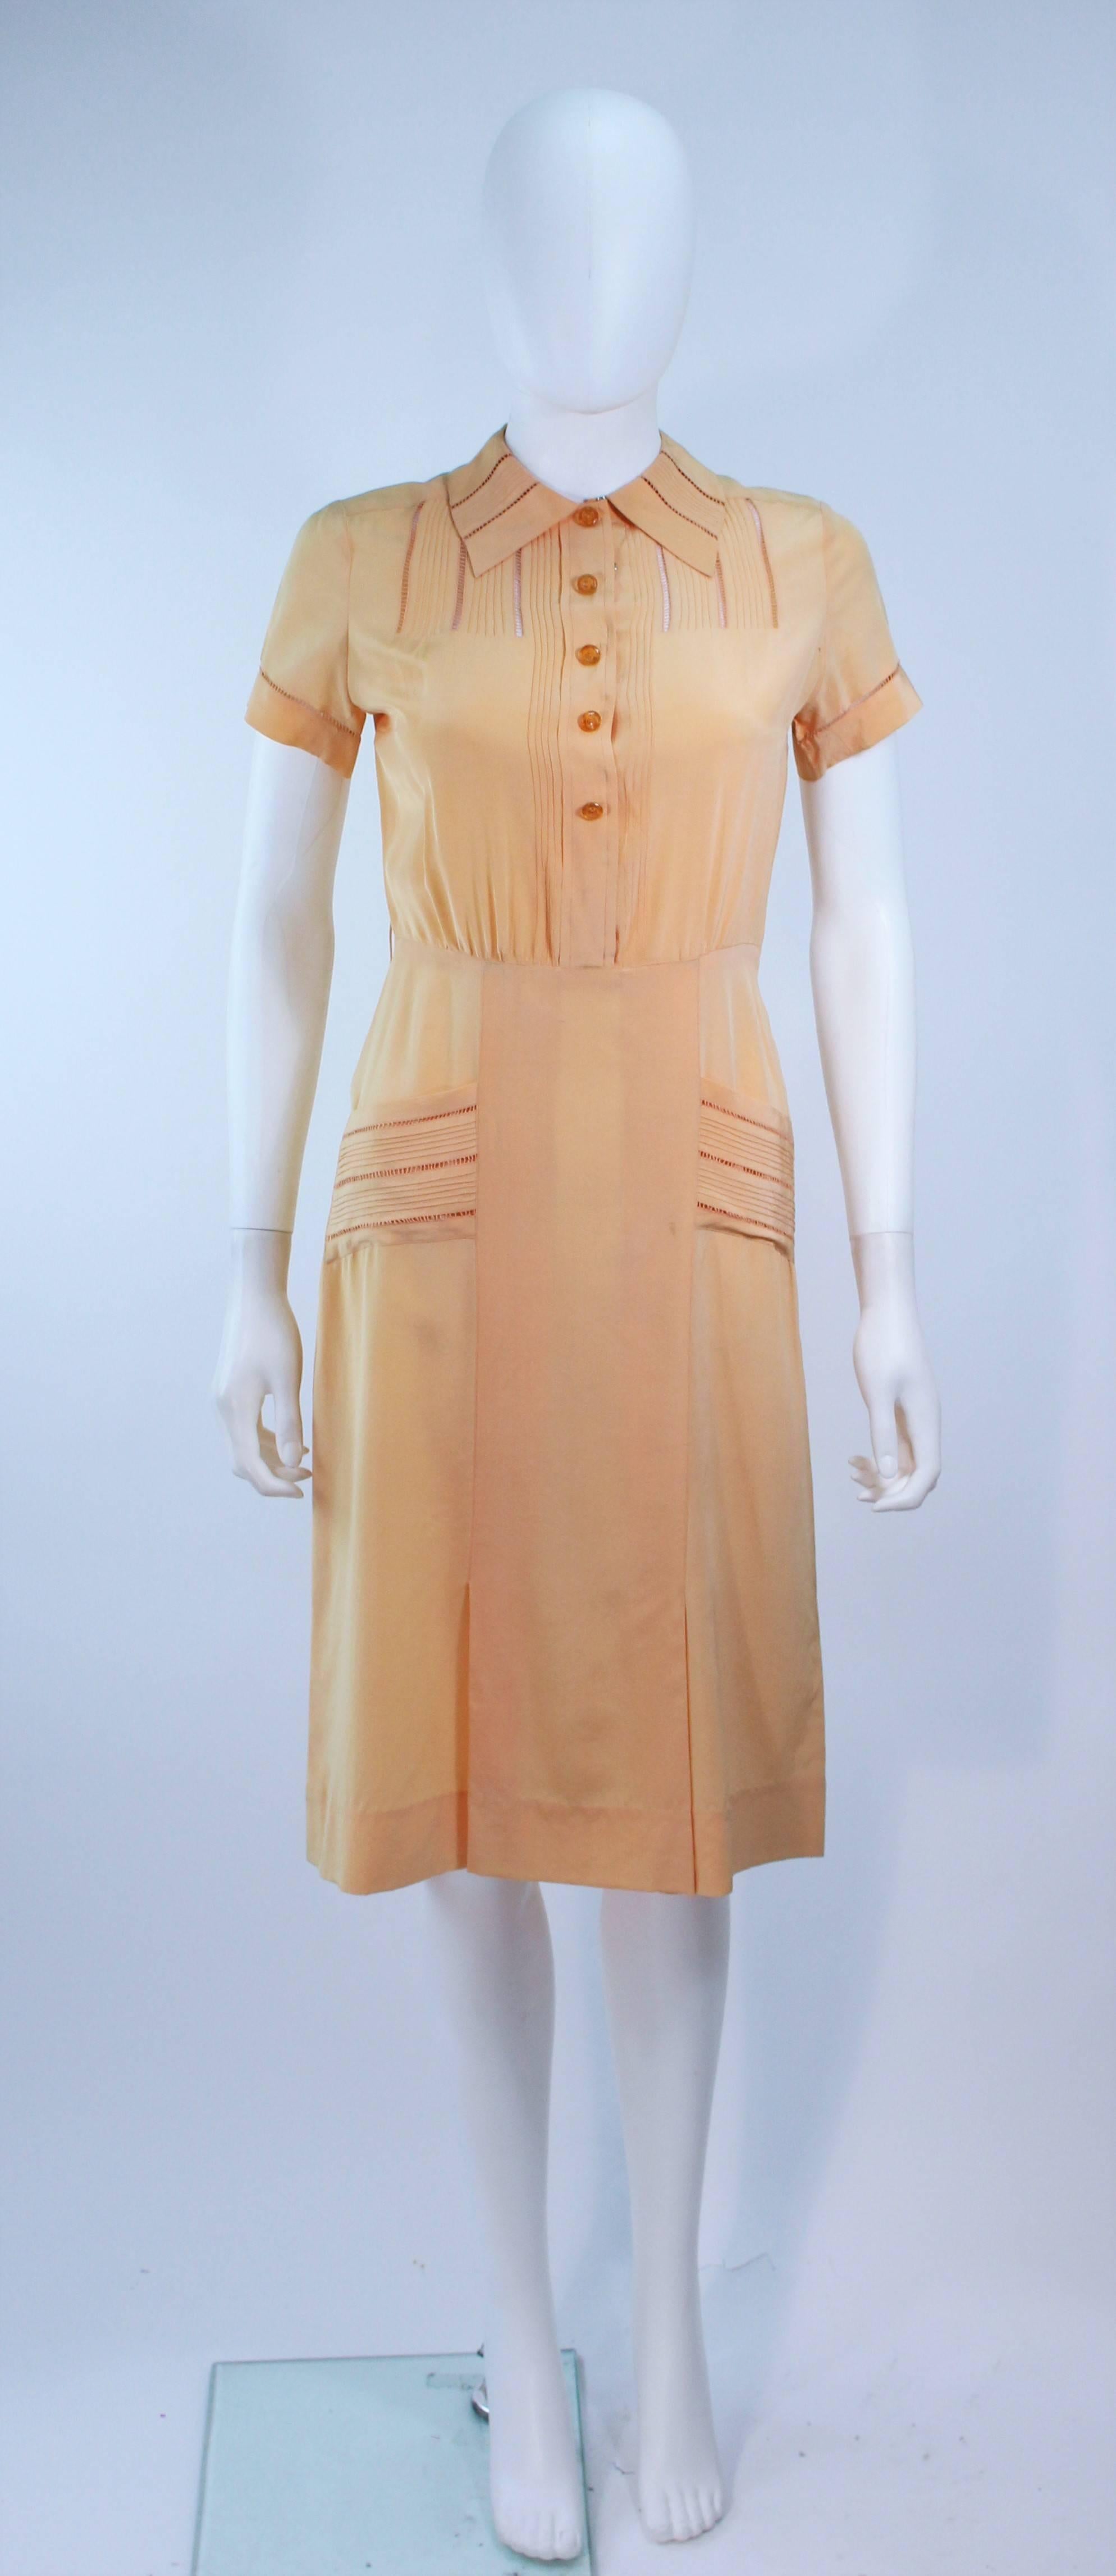 This dress is composed of an apricot hue silk. Features sheer lace inserts, front pockets, and center front buttons. In excellent vintage condition, some discoloration due to age.

**Please cross-reference measurements for personal accuracy. Size